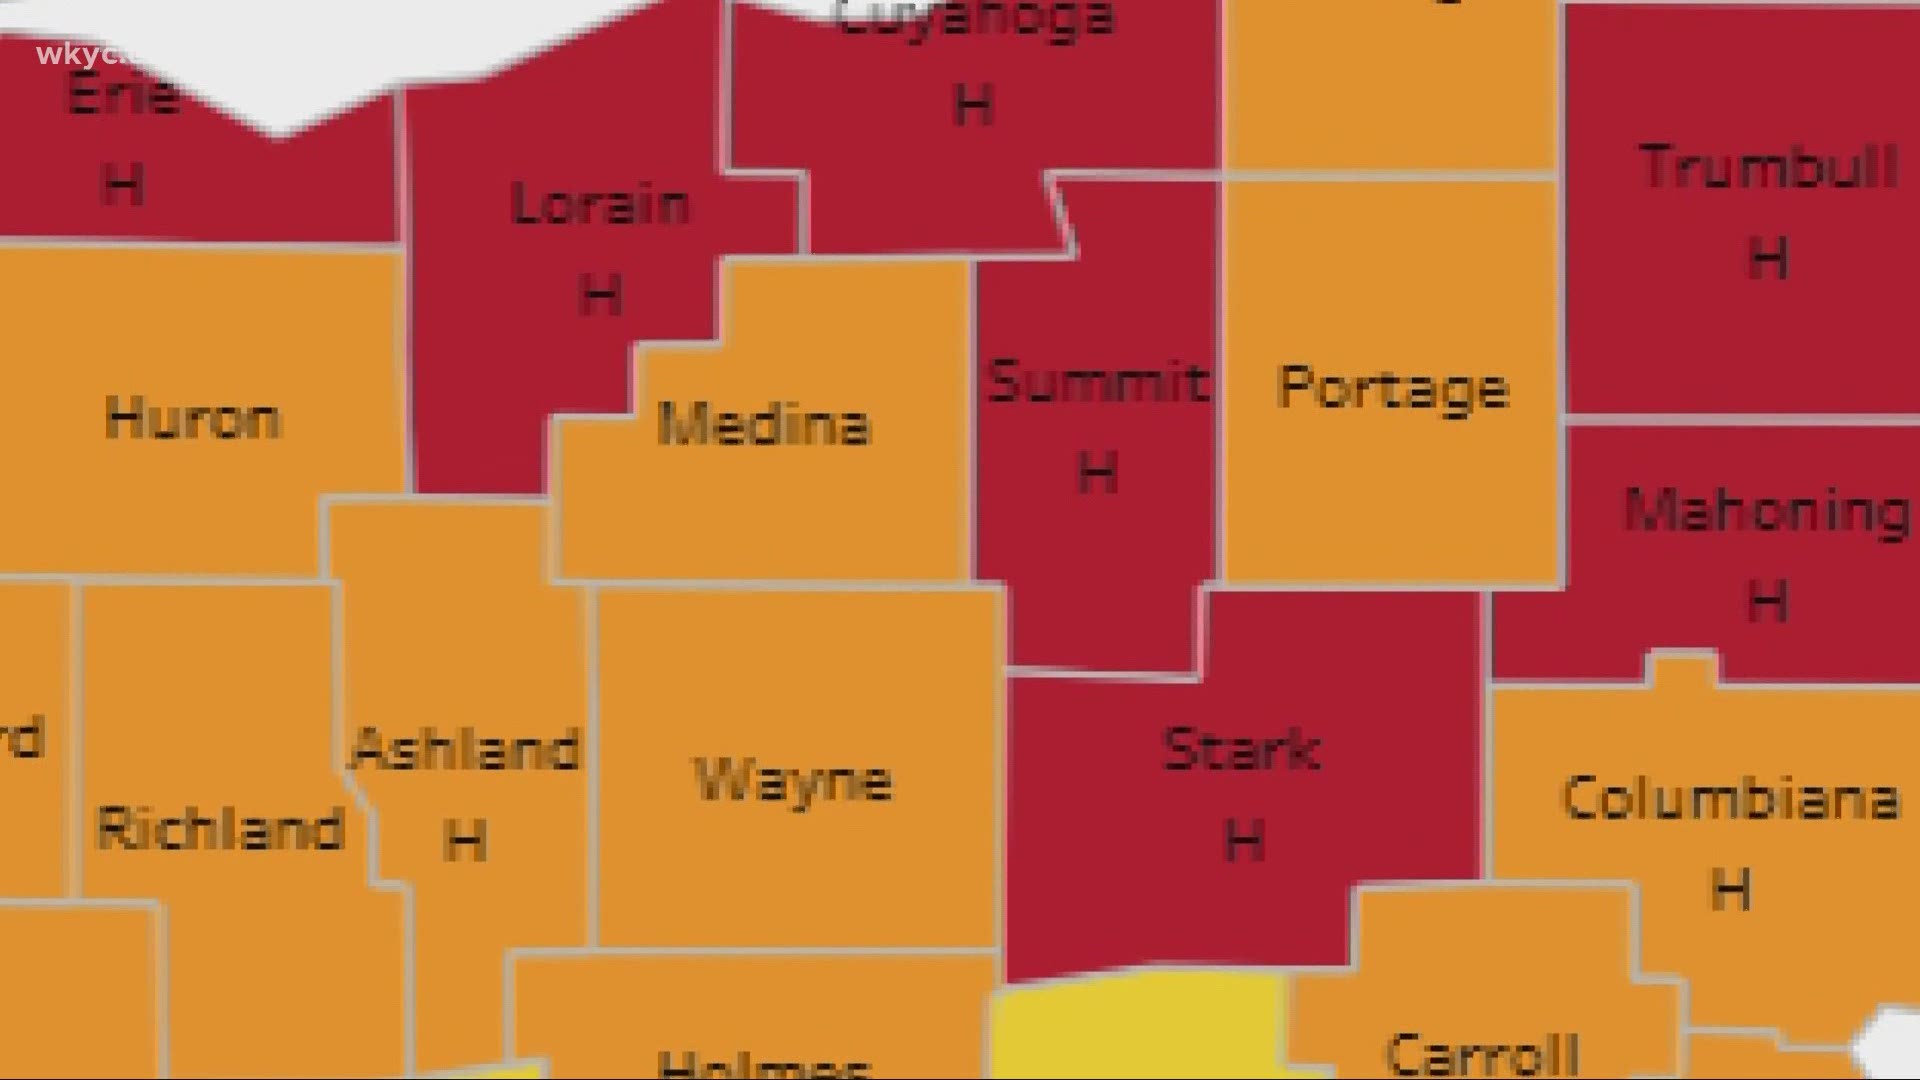 Several counties in Northeast Ohio remain under a Level 3 "red" alert for COVID-19 spread.